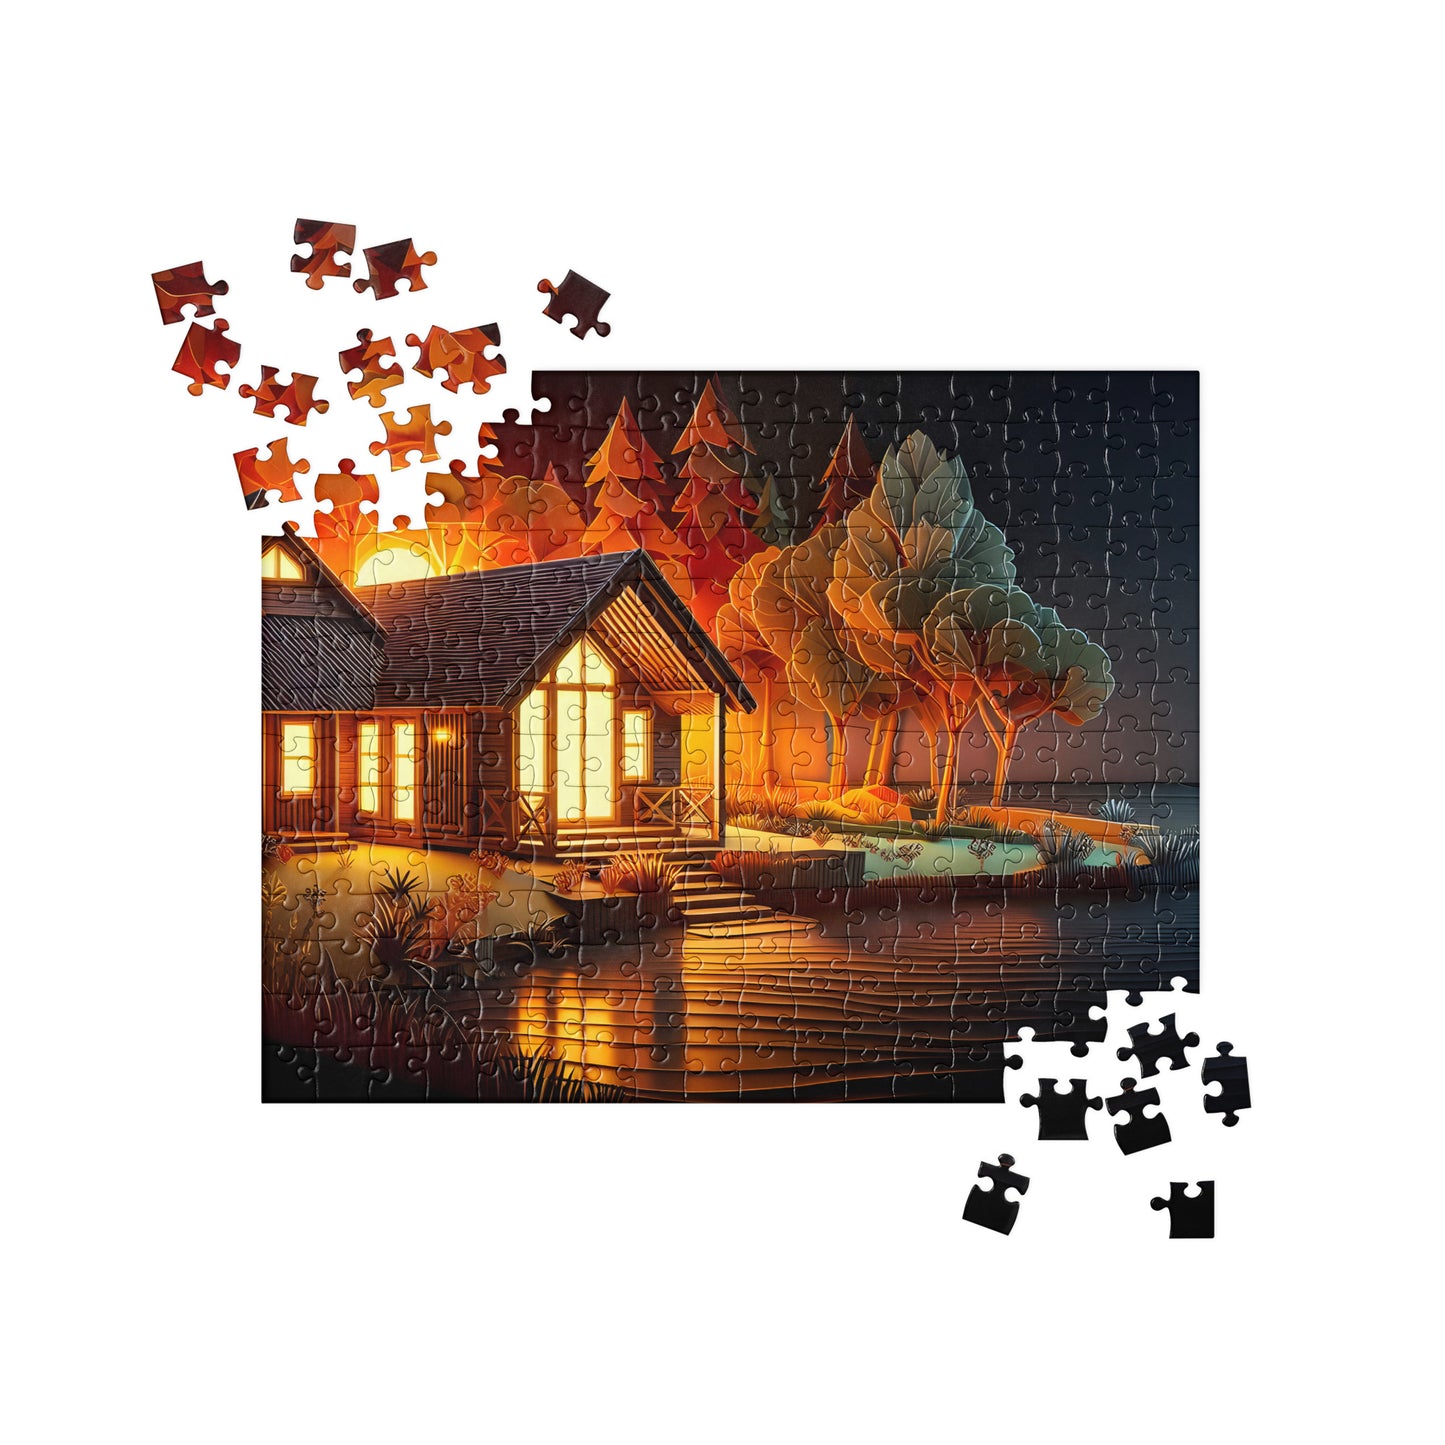 3D Wooden Cabin - Jigsaw Puzzle #3